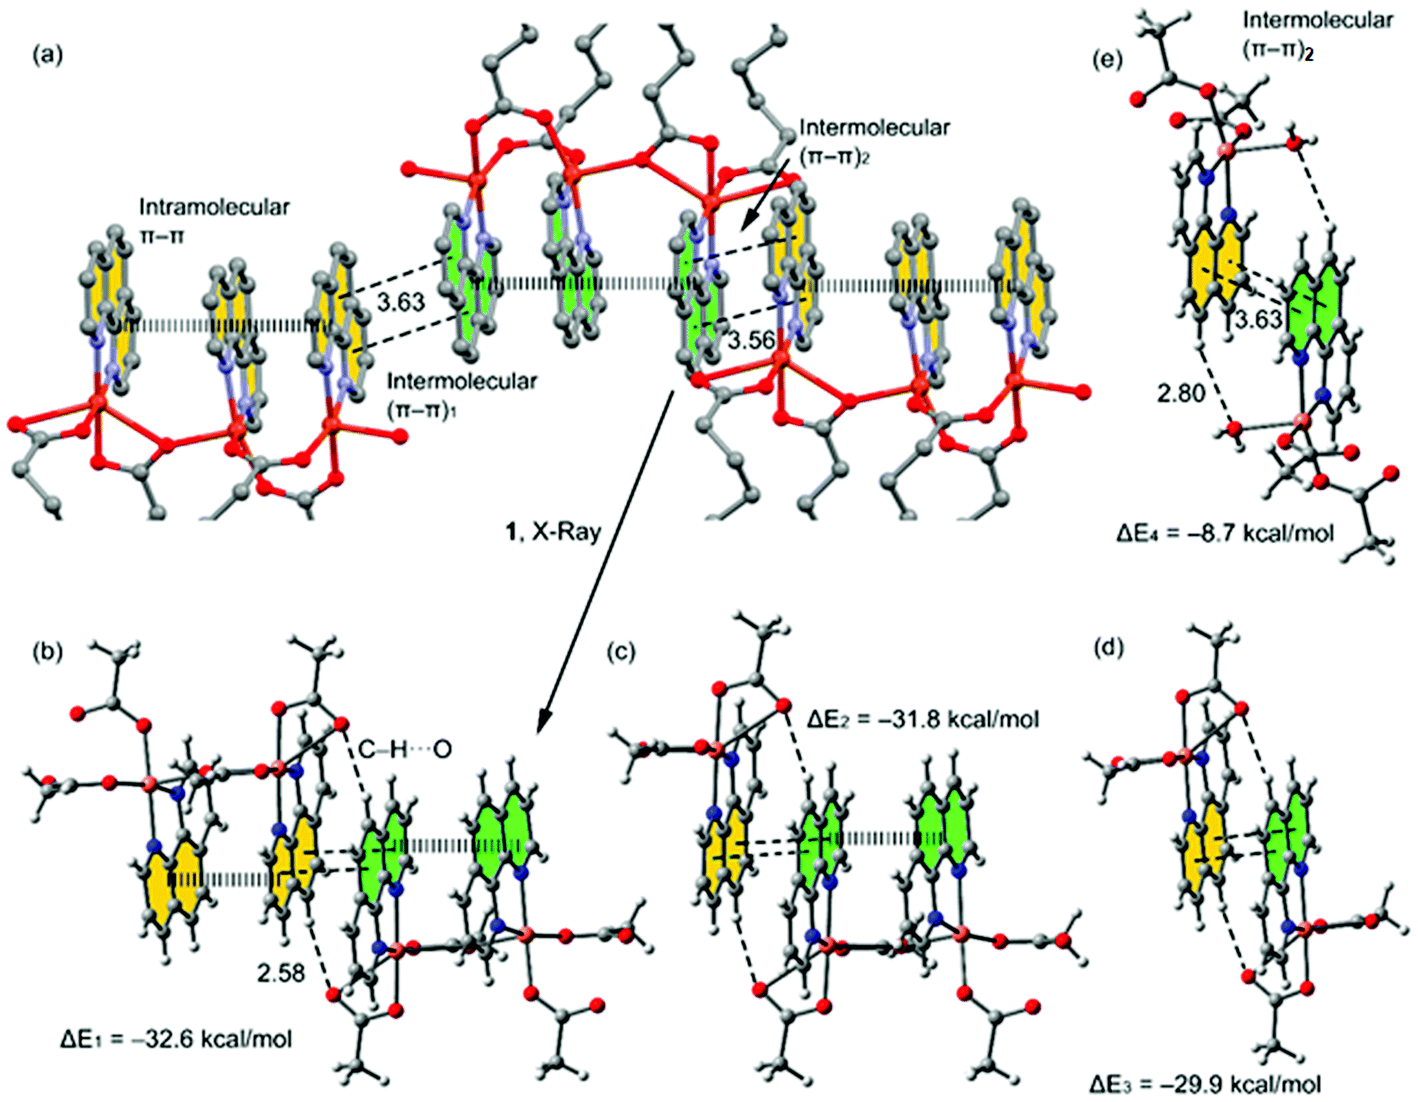 Adipato Bridged Novel Hexanuclear Cu Ii And Polymeric Co Ii Coordination Compounds Involving Cooperative Supramolecular Assemblies And Encapsulated Guest Water Clusters In A Square Grid Host Antiproliferative Evaluation And Theoretical Studies